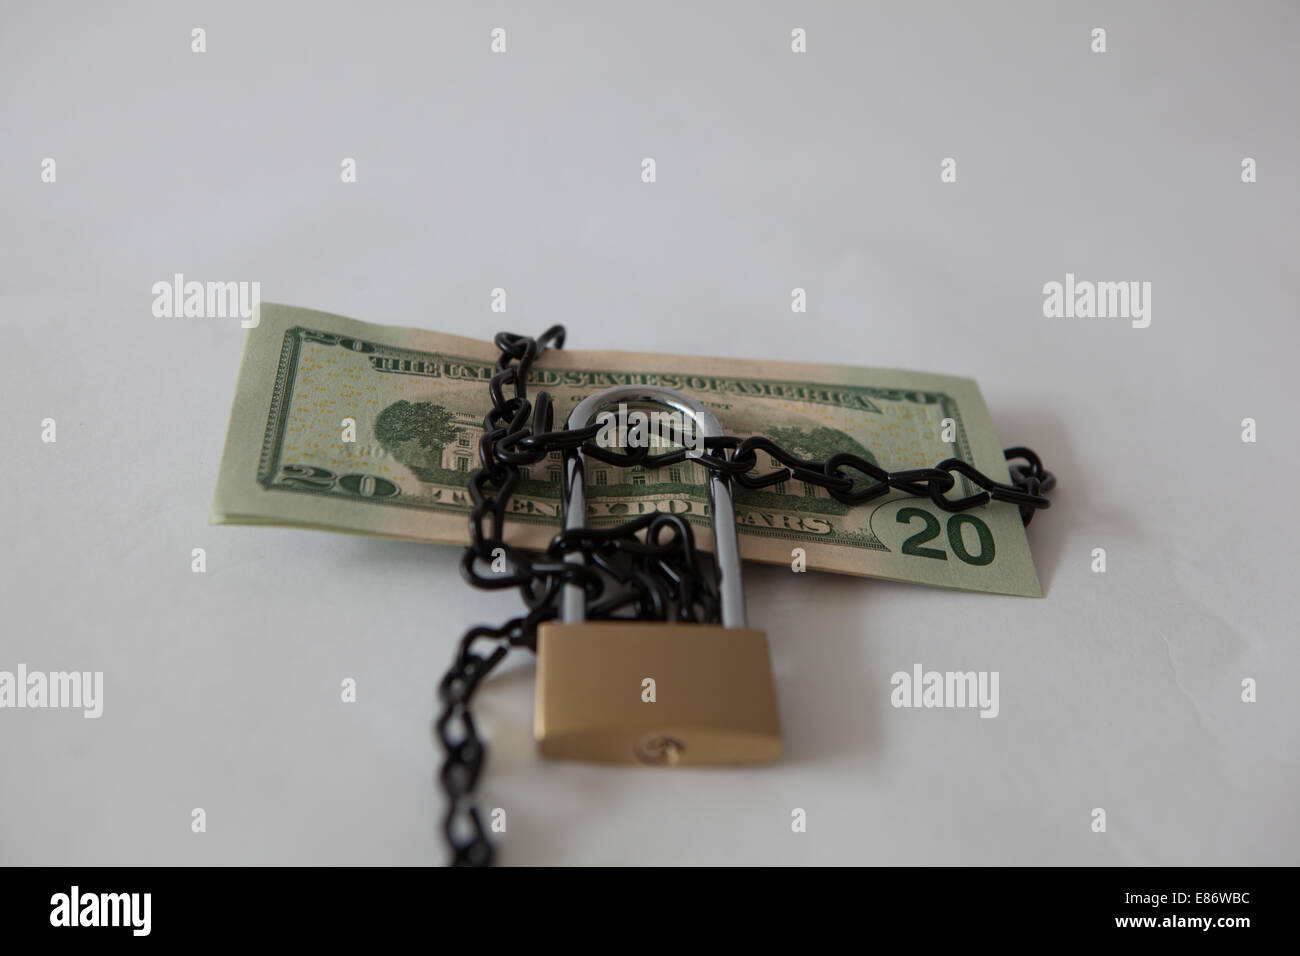 dollars tied up in a lock Stock Photo